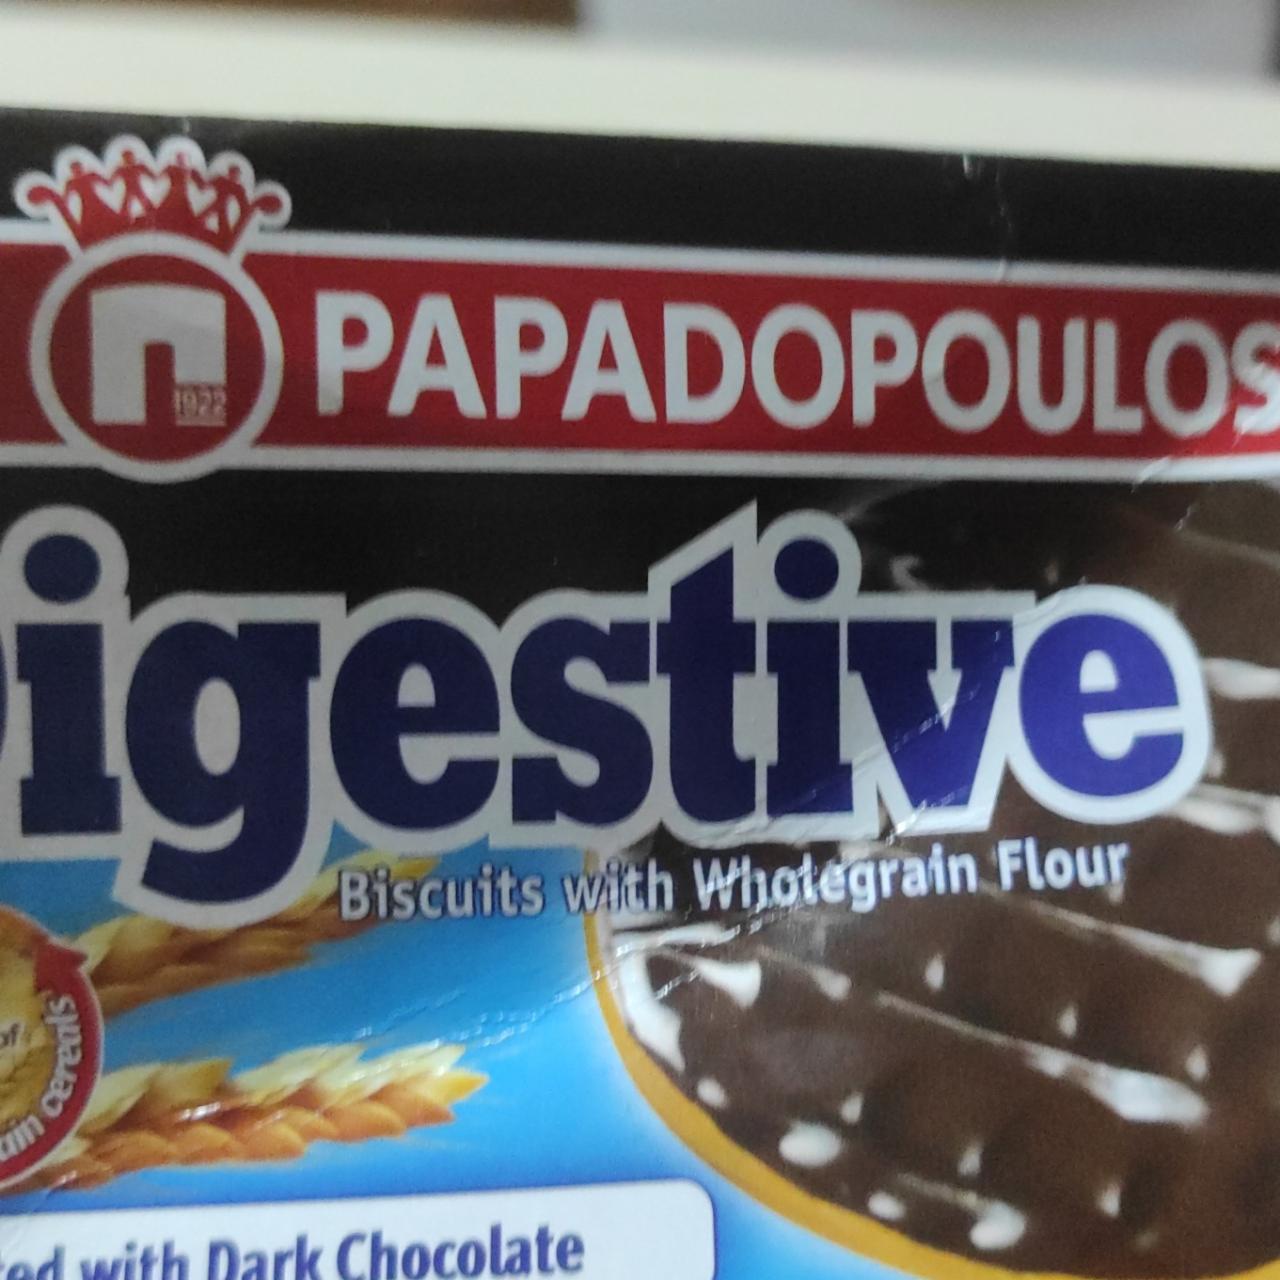 Fotografie - Digestive Biscuits with Wholegrain Flour Coated with Dark Chocolate Papadopoulos